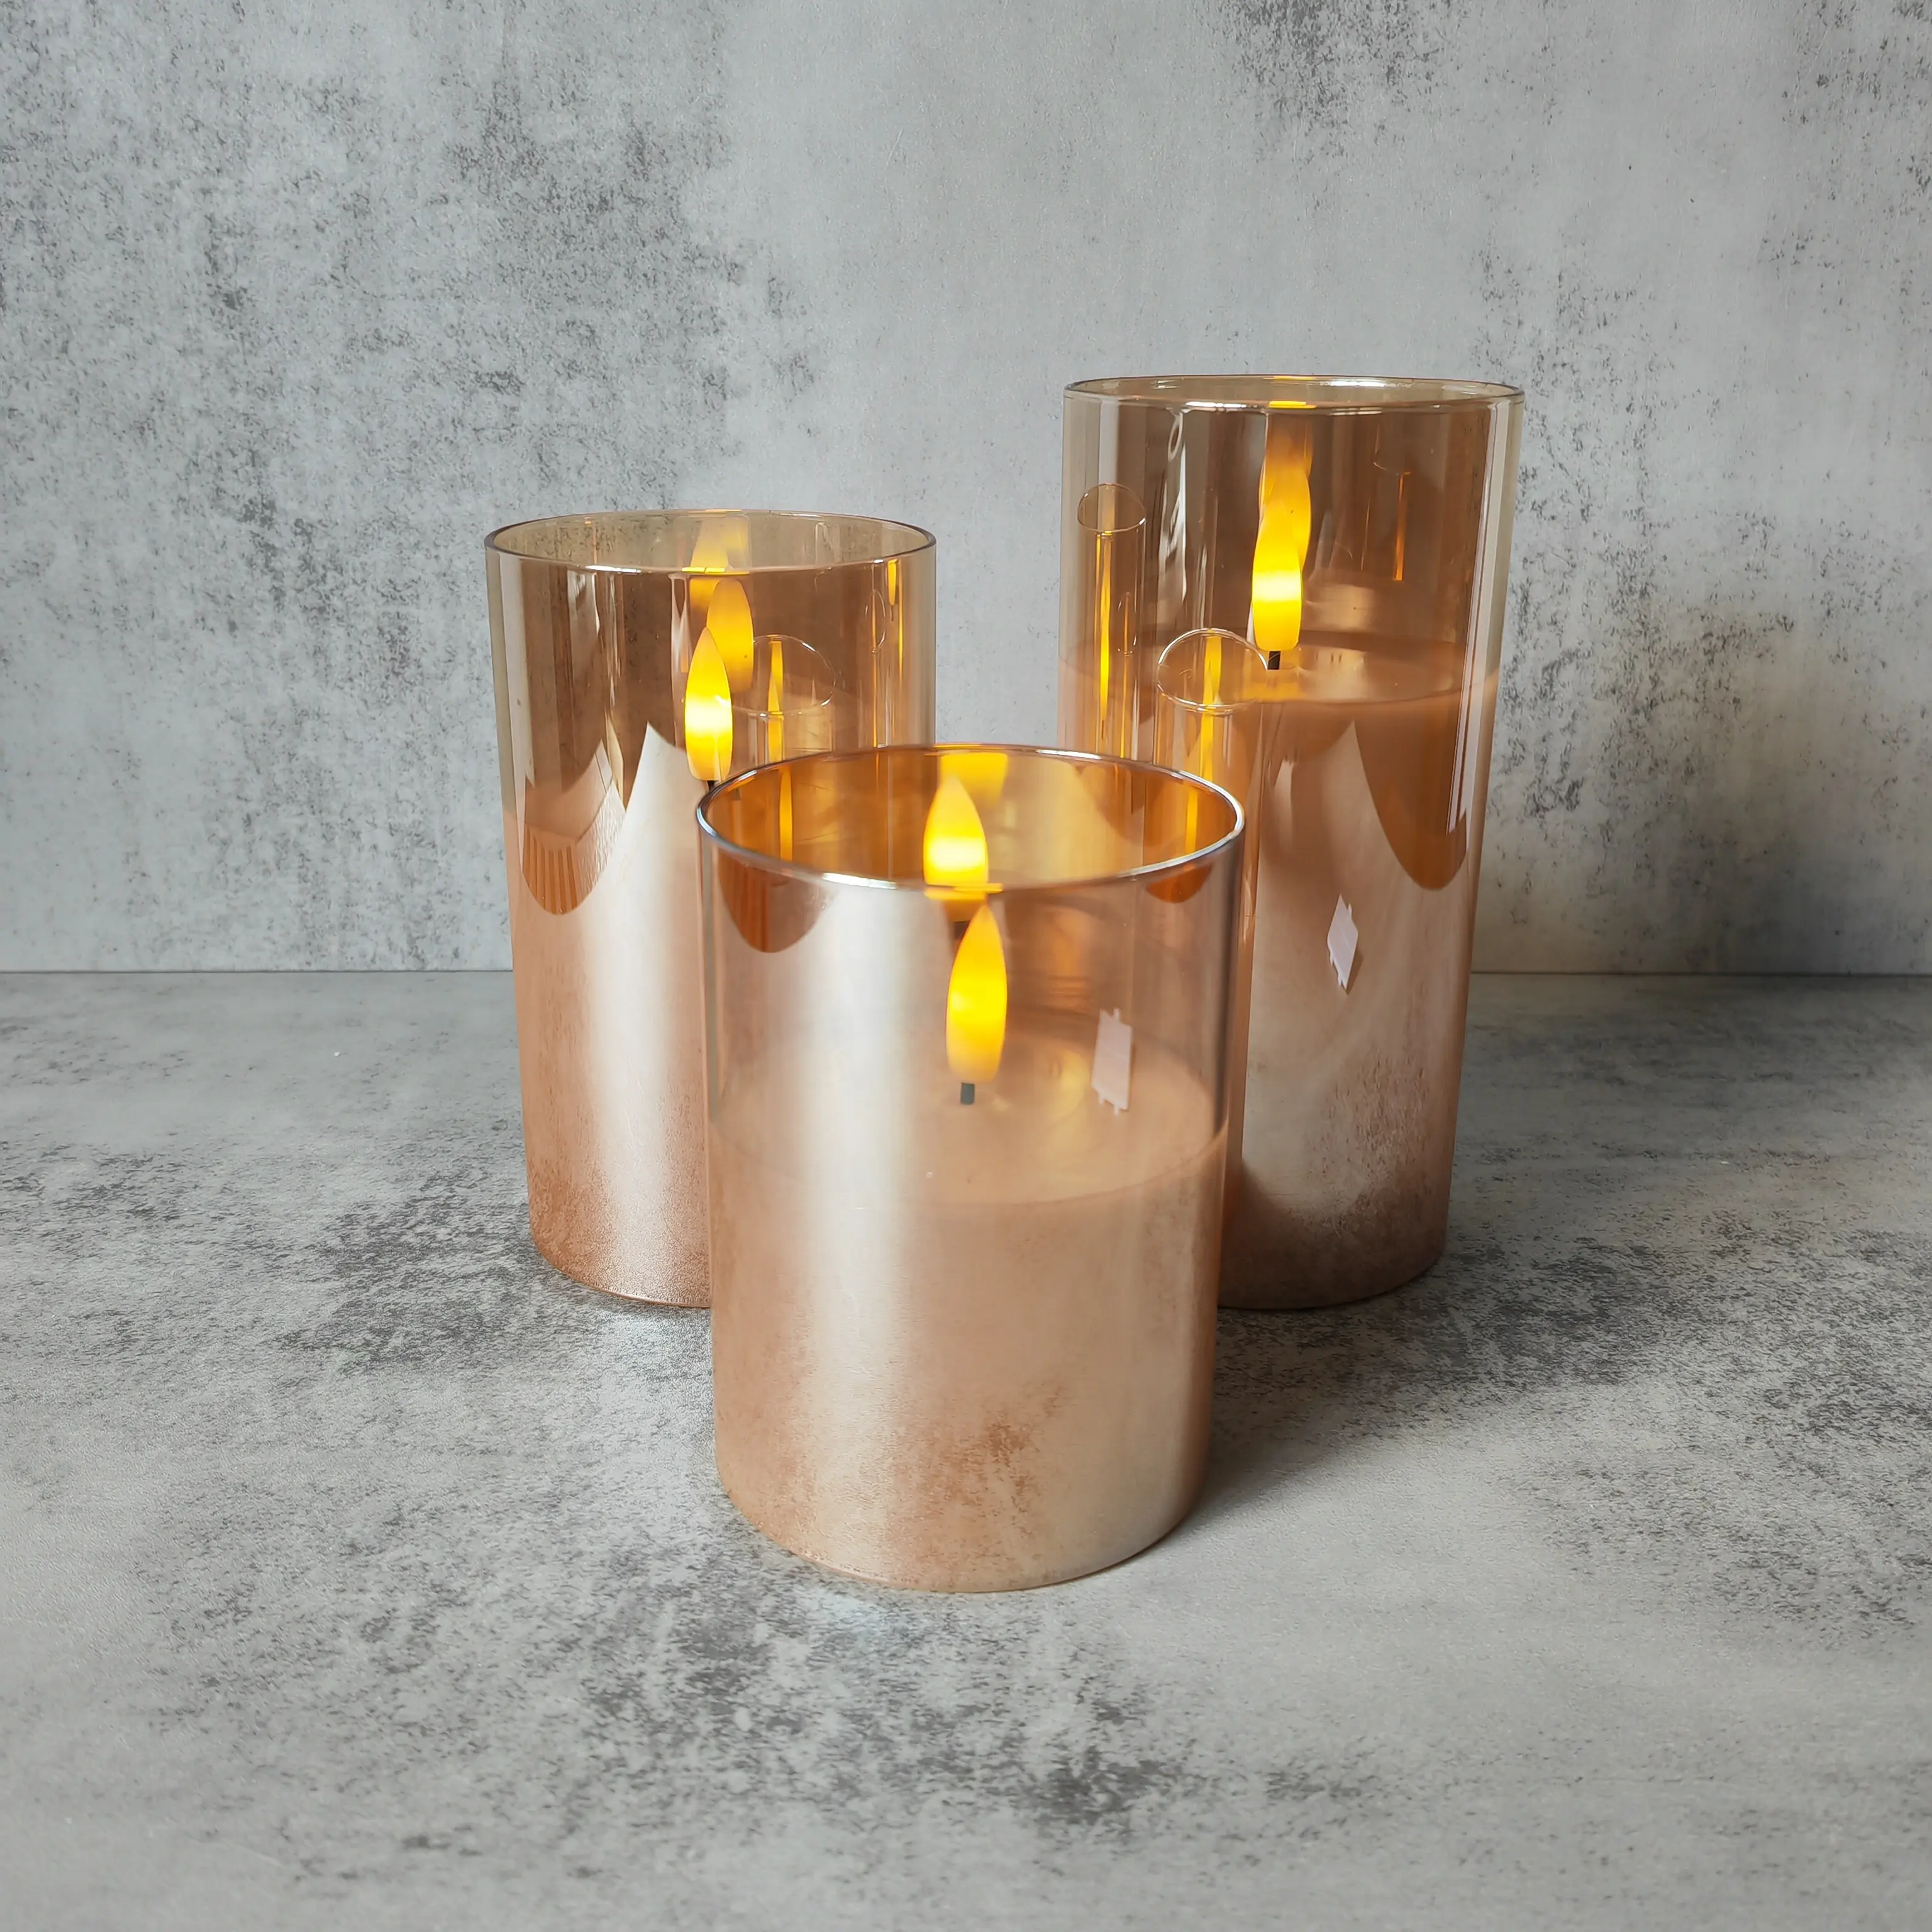 Pack of 3 Flameless Flickering 3D Wick LED Amber/Gold Glass Pillar Candle with Remote and Timer, Battery Powered Warm White